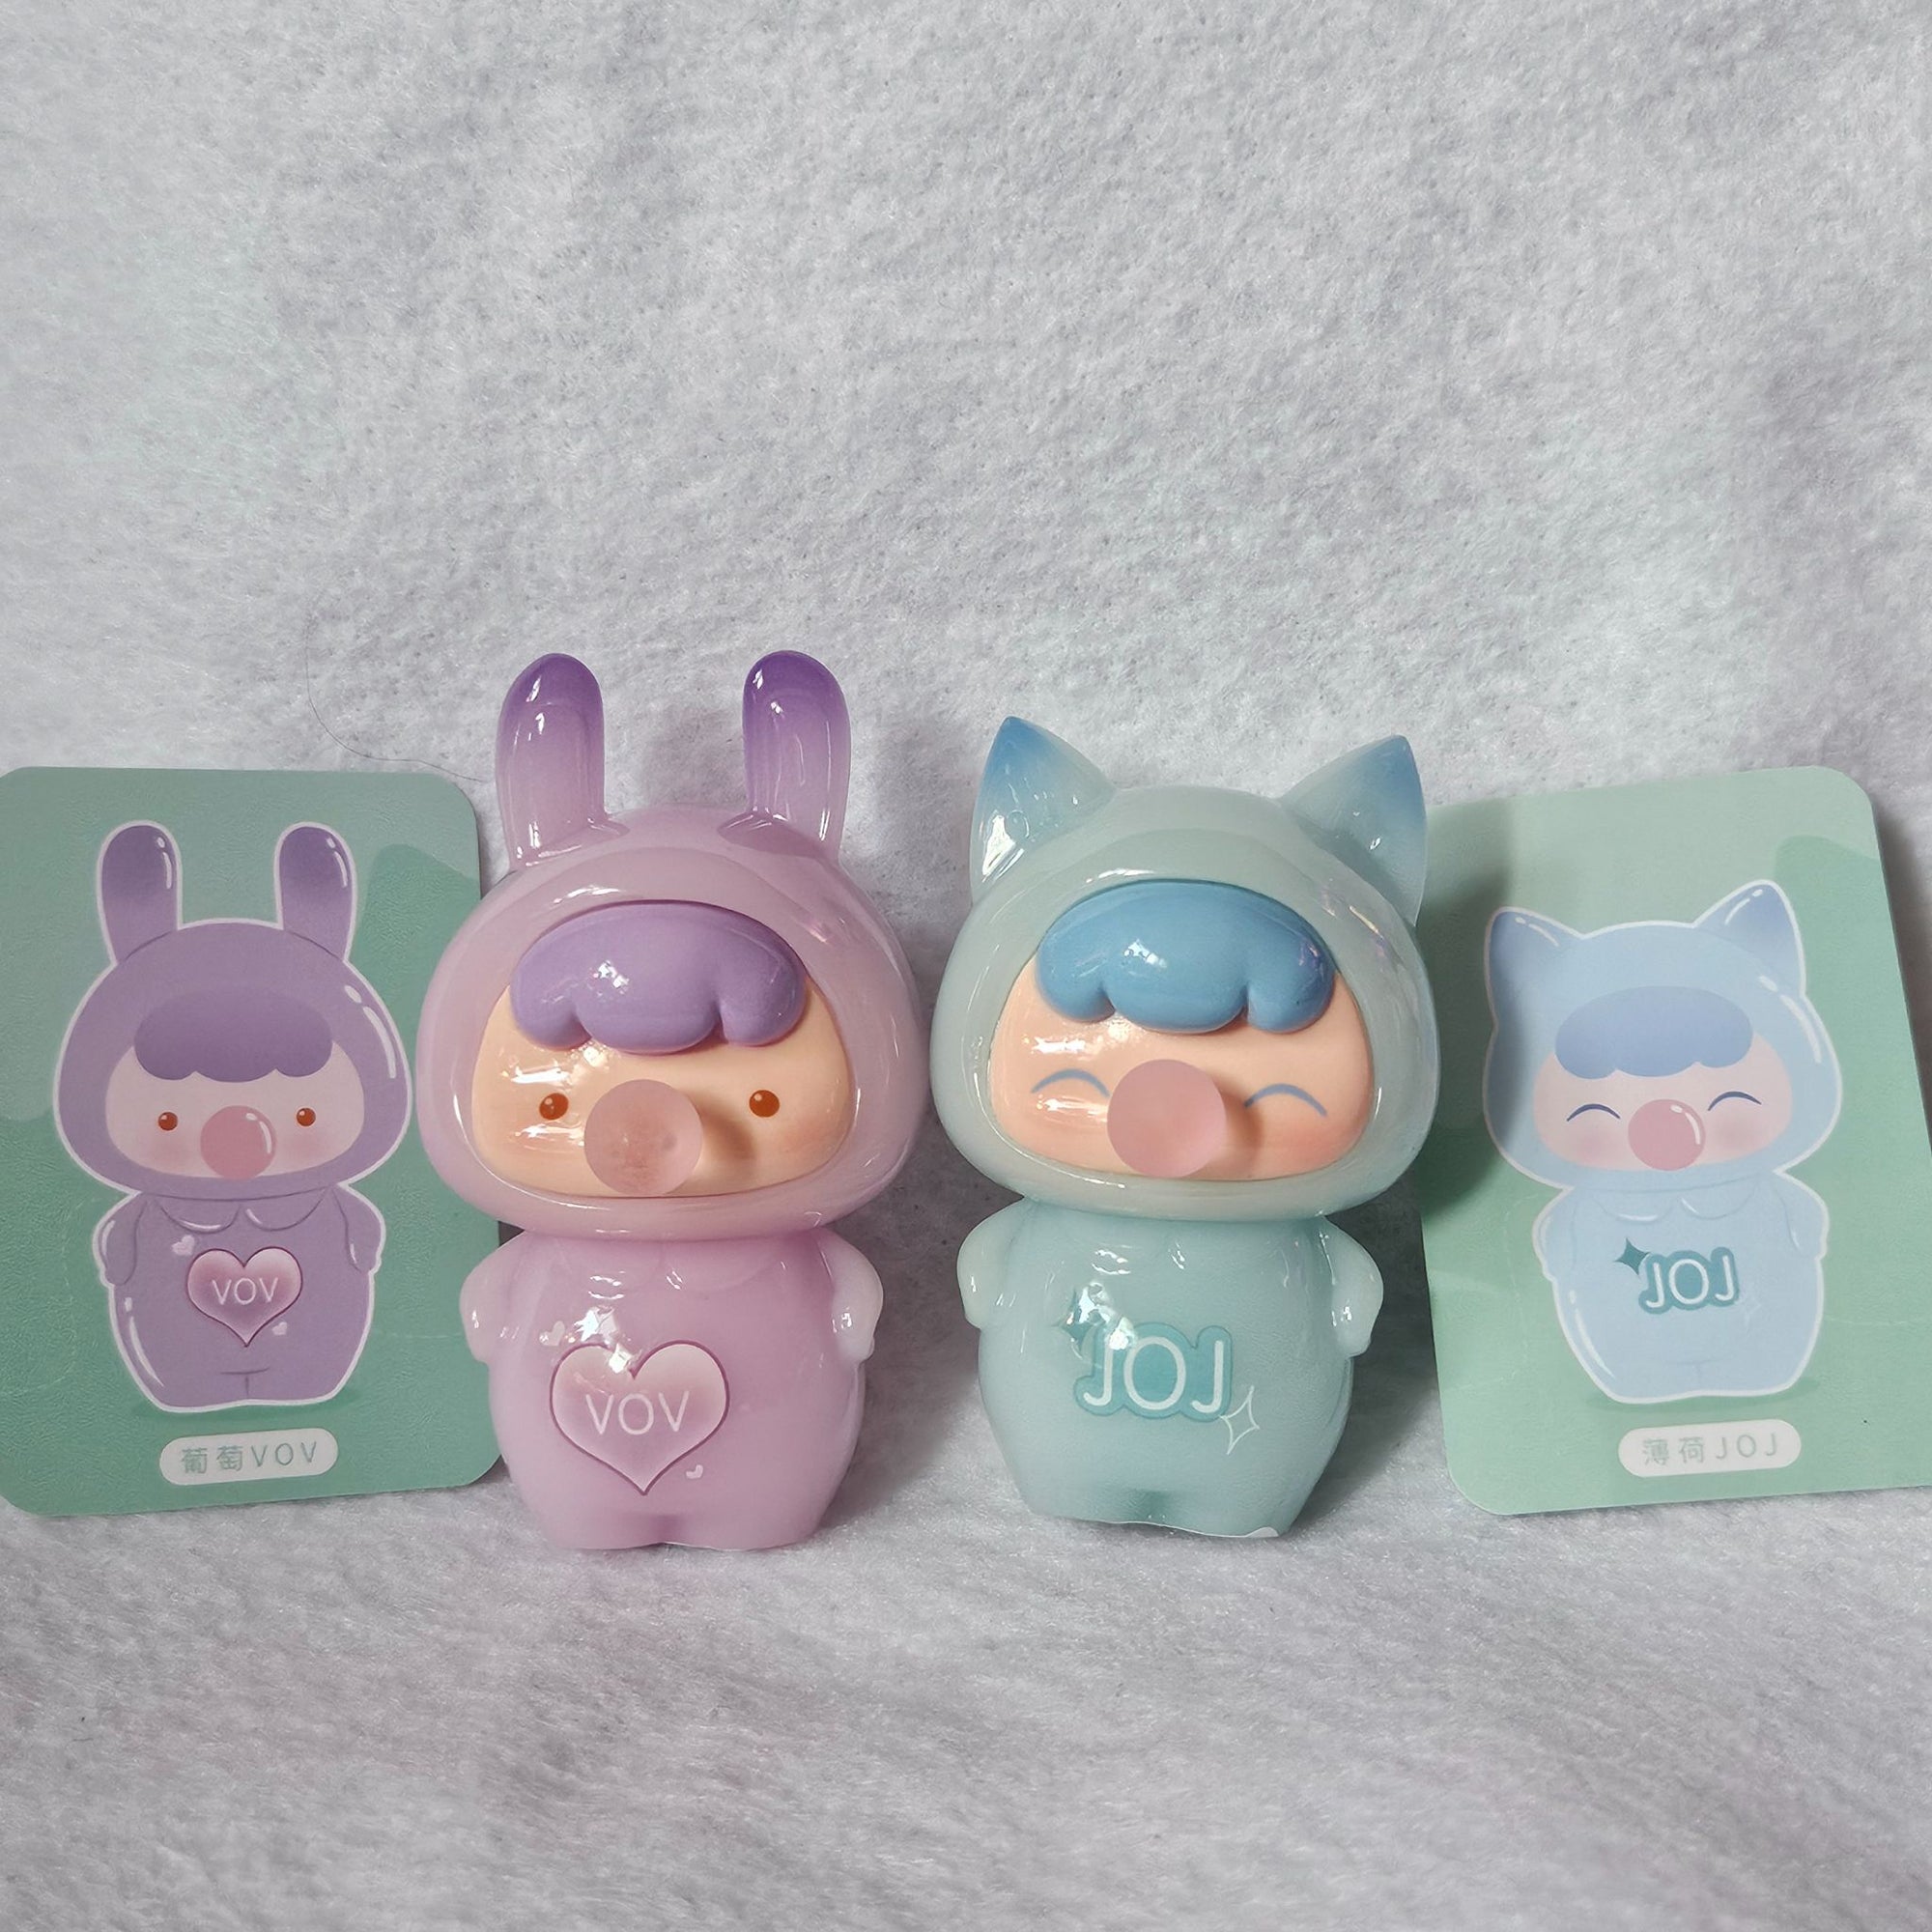 Purple rabbit and blue cat pair - Cute heart candy house - Tingswoo - 1